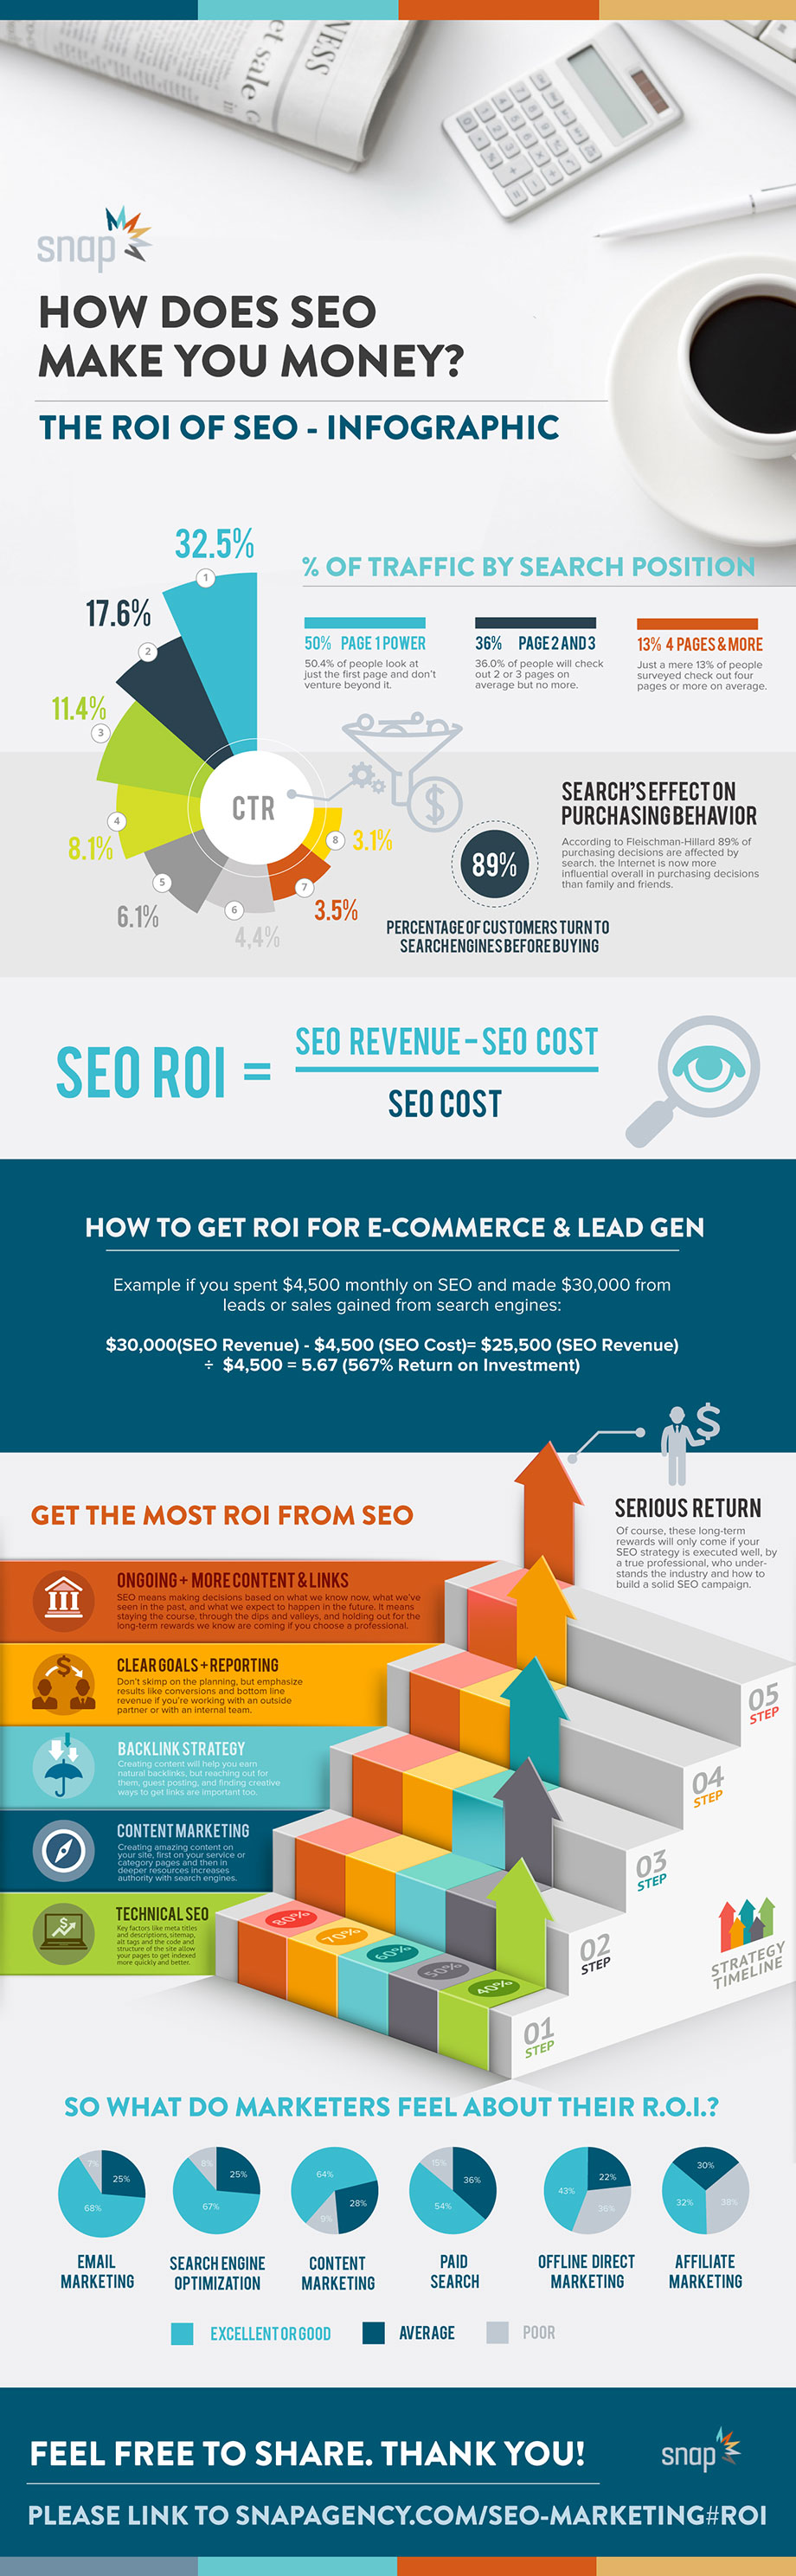 What is the Return On Investment - ROI of SEO? (Infographic)